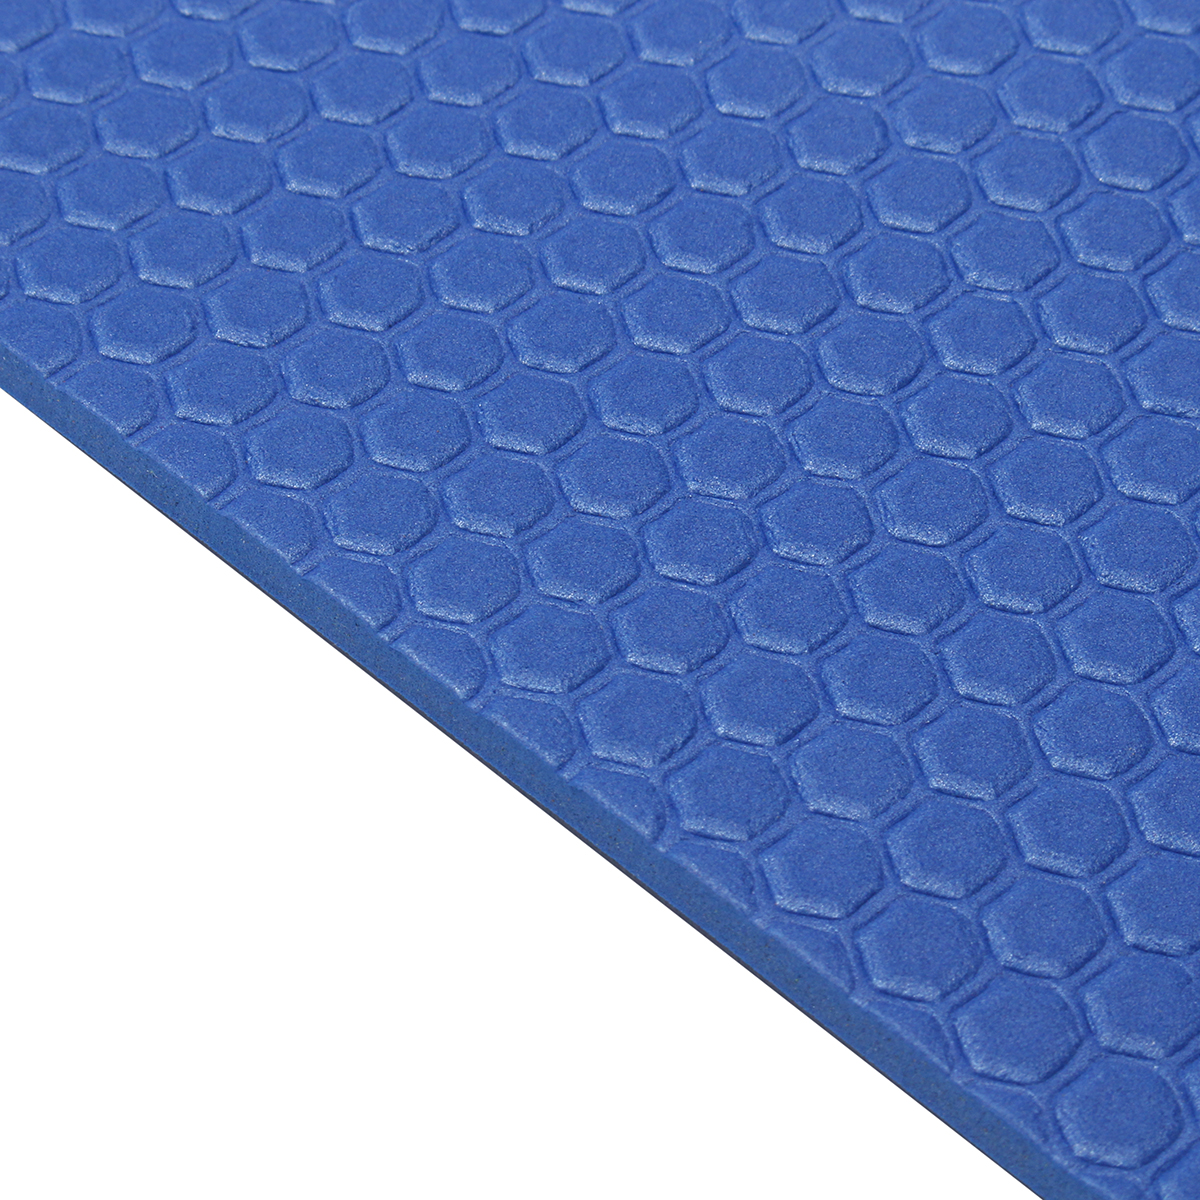 Multi-Size-PVC-Swimming-Pool-Anti-skip-Mat-Polyester-Cloth-Easy-To-Clean-Square-Swimming-Pool-Cover-1176086-5